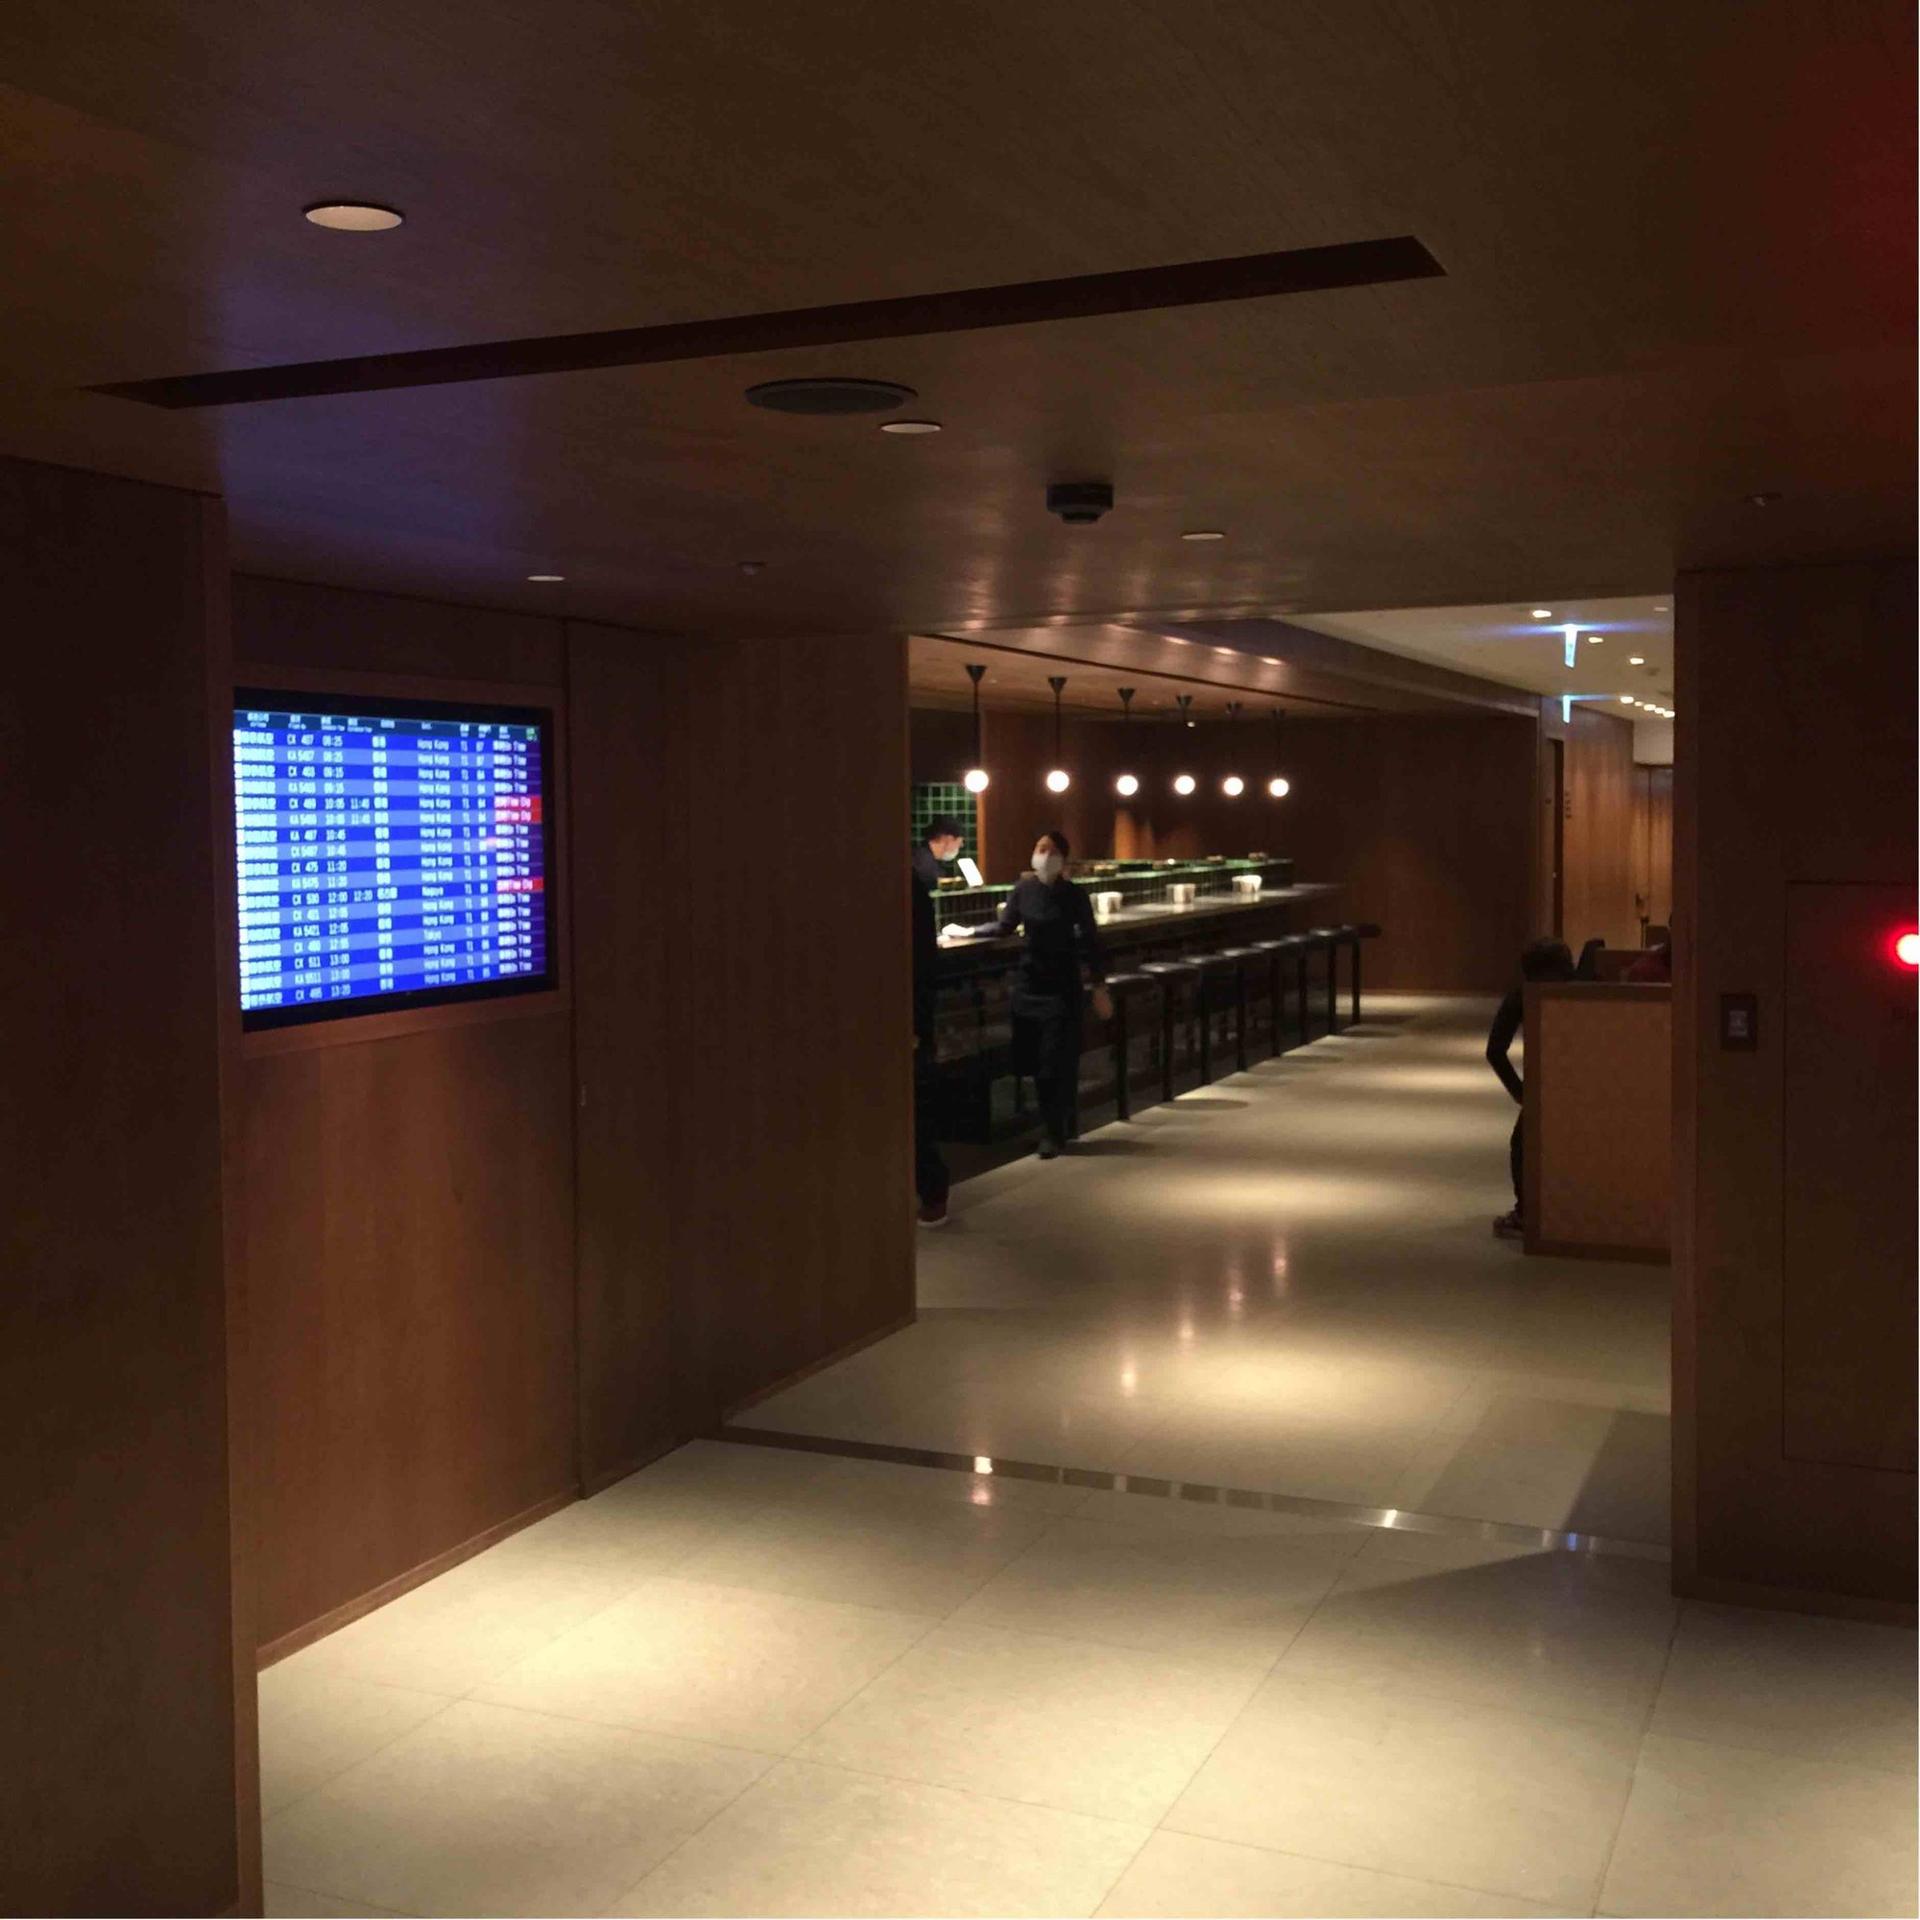 Cathay Pacific Lounge image 22 of 37